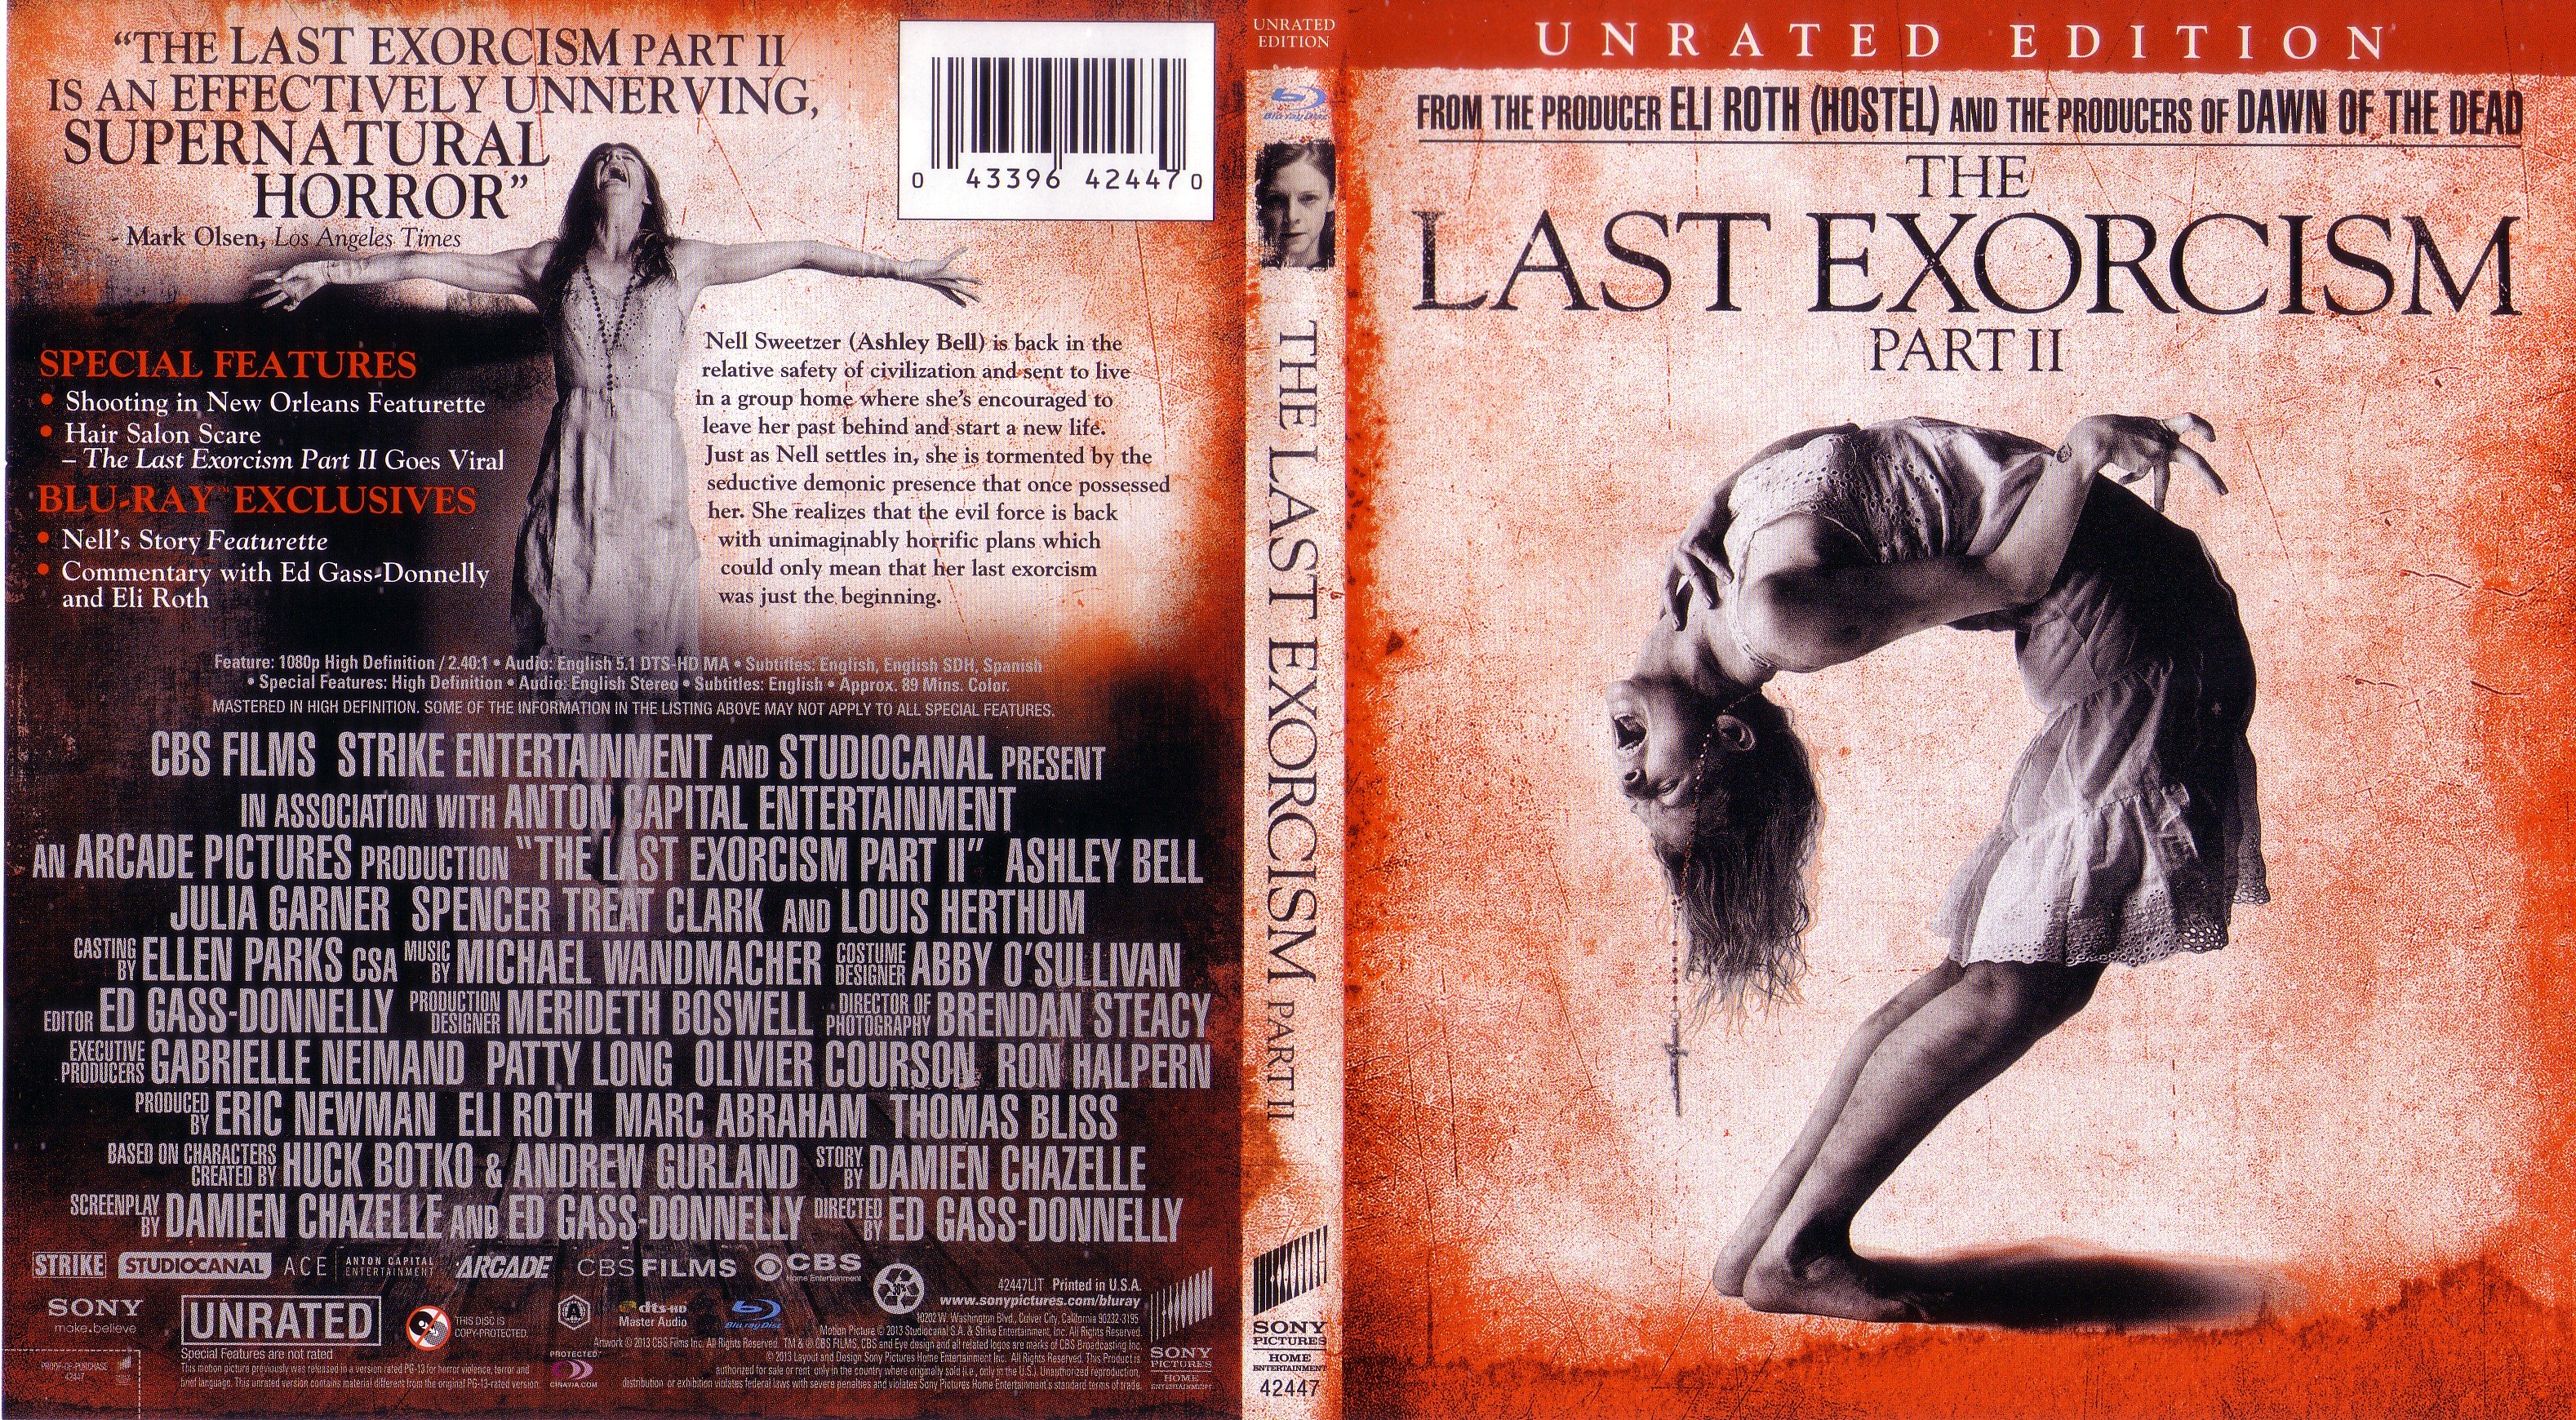 Jaquette DVD The Last Exorcism Part II Zone 1 (BLU-RAY)